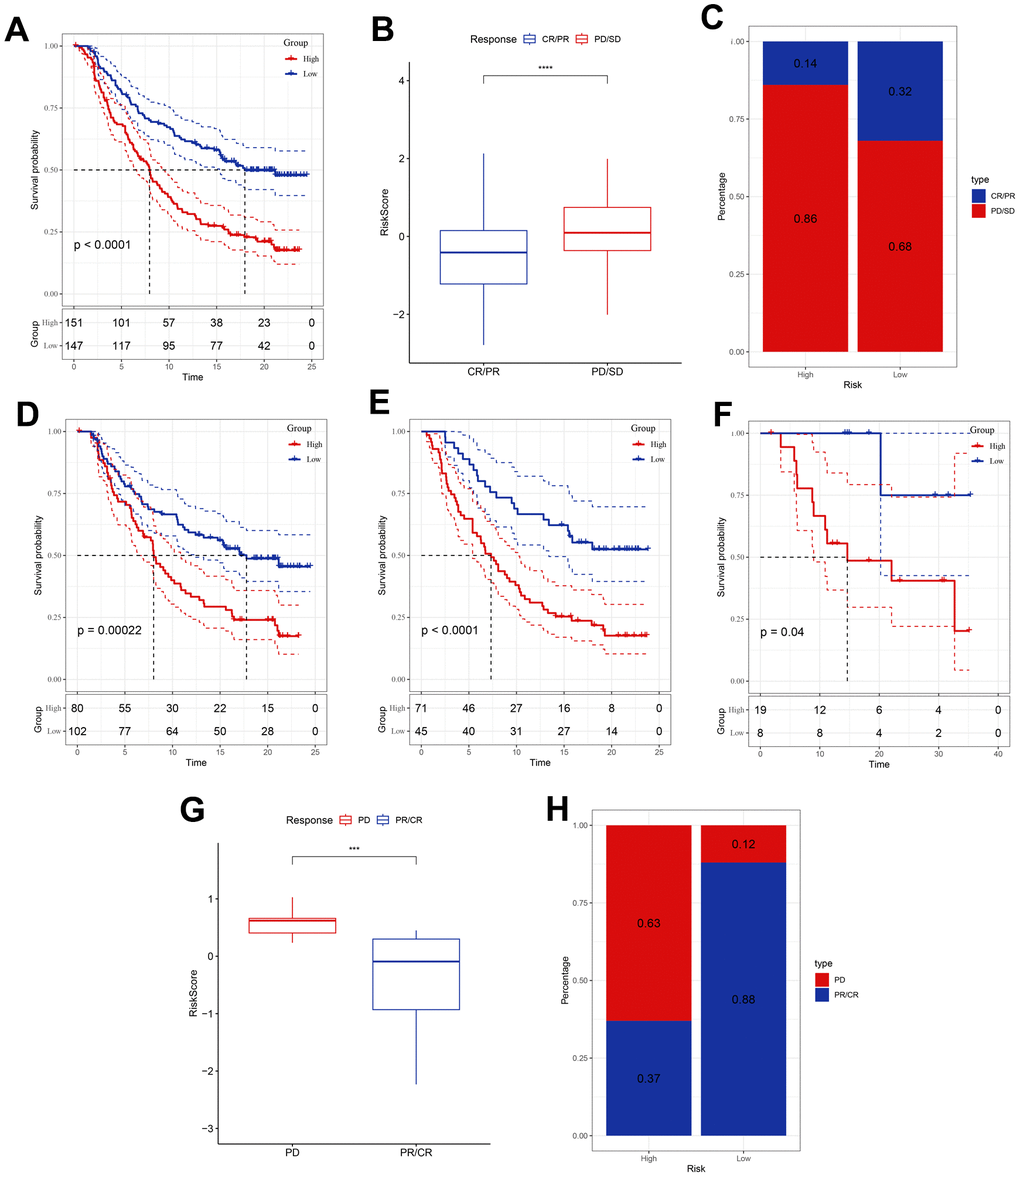 Responsiveness of risk score to PD-L1 blockade immunotherapy in the IMvigor210 and GSE78220 cohorts. (A) Prognostic difference among the risk score groups in the IMvigor210 cohort. (B) Differences in risk scores among immunotherapy responses in the IMvigor210 cohort. (C) Distribution of immunotherapy responses among the risk score groups in the IMvigor210 cohort. (D, E) Prognostic difference between the risk score groups in patients with early or advanced stage disease in the IMvigor210 cohort. (F) Prognostic difference among the risk score groups in the GSE78220 cohort. (G) Differences in risk scores among immunotherapy responses in the GSE78220 cohort. (H) Distribution of immunotherapy responses among the risk score groups in the GSE78220 cohort. ***P 